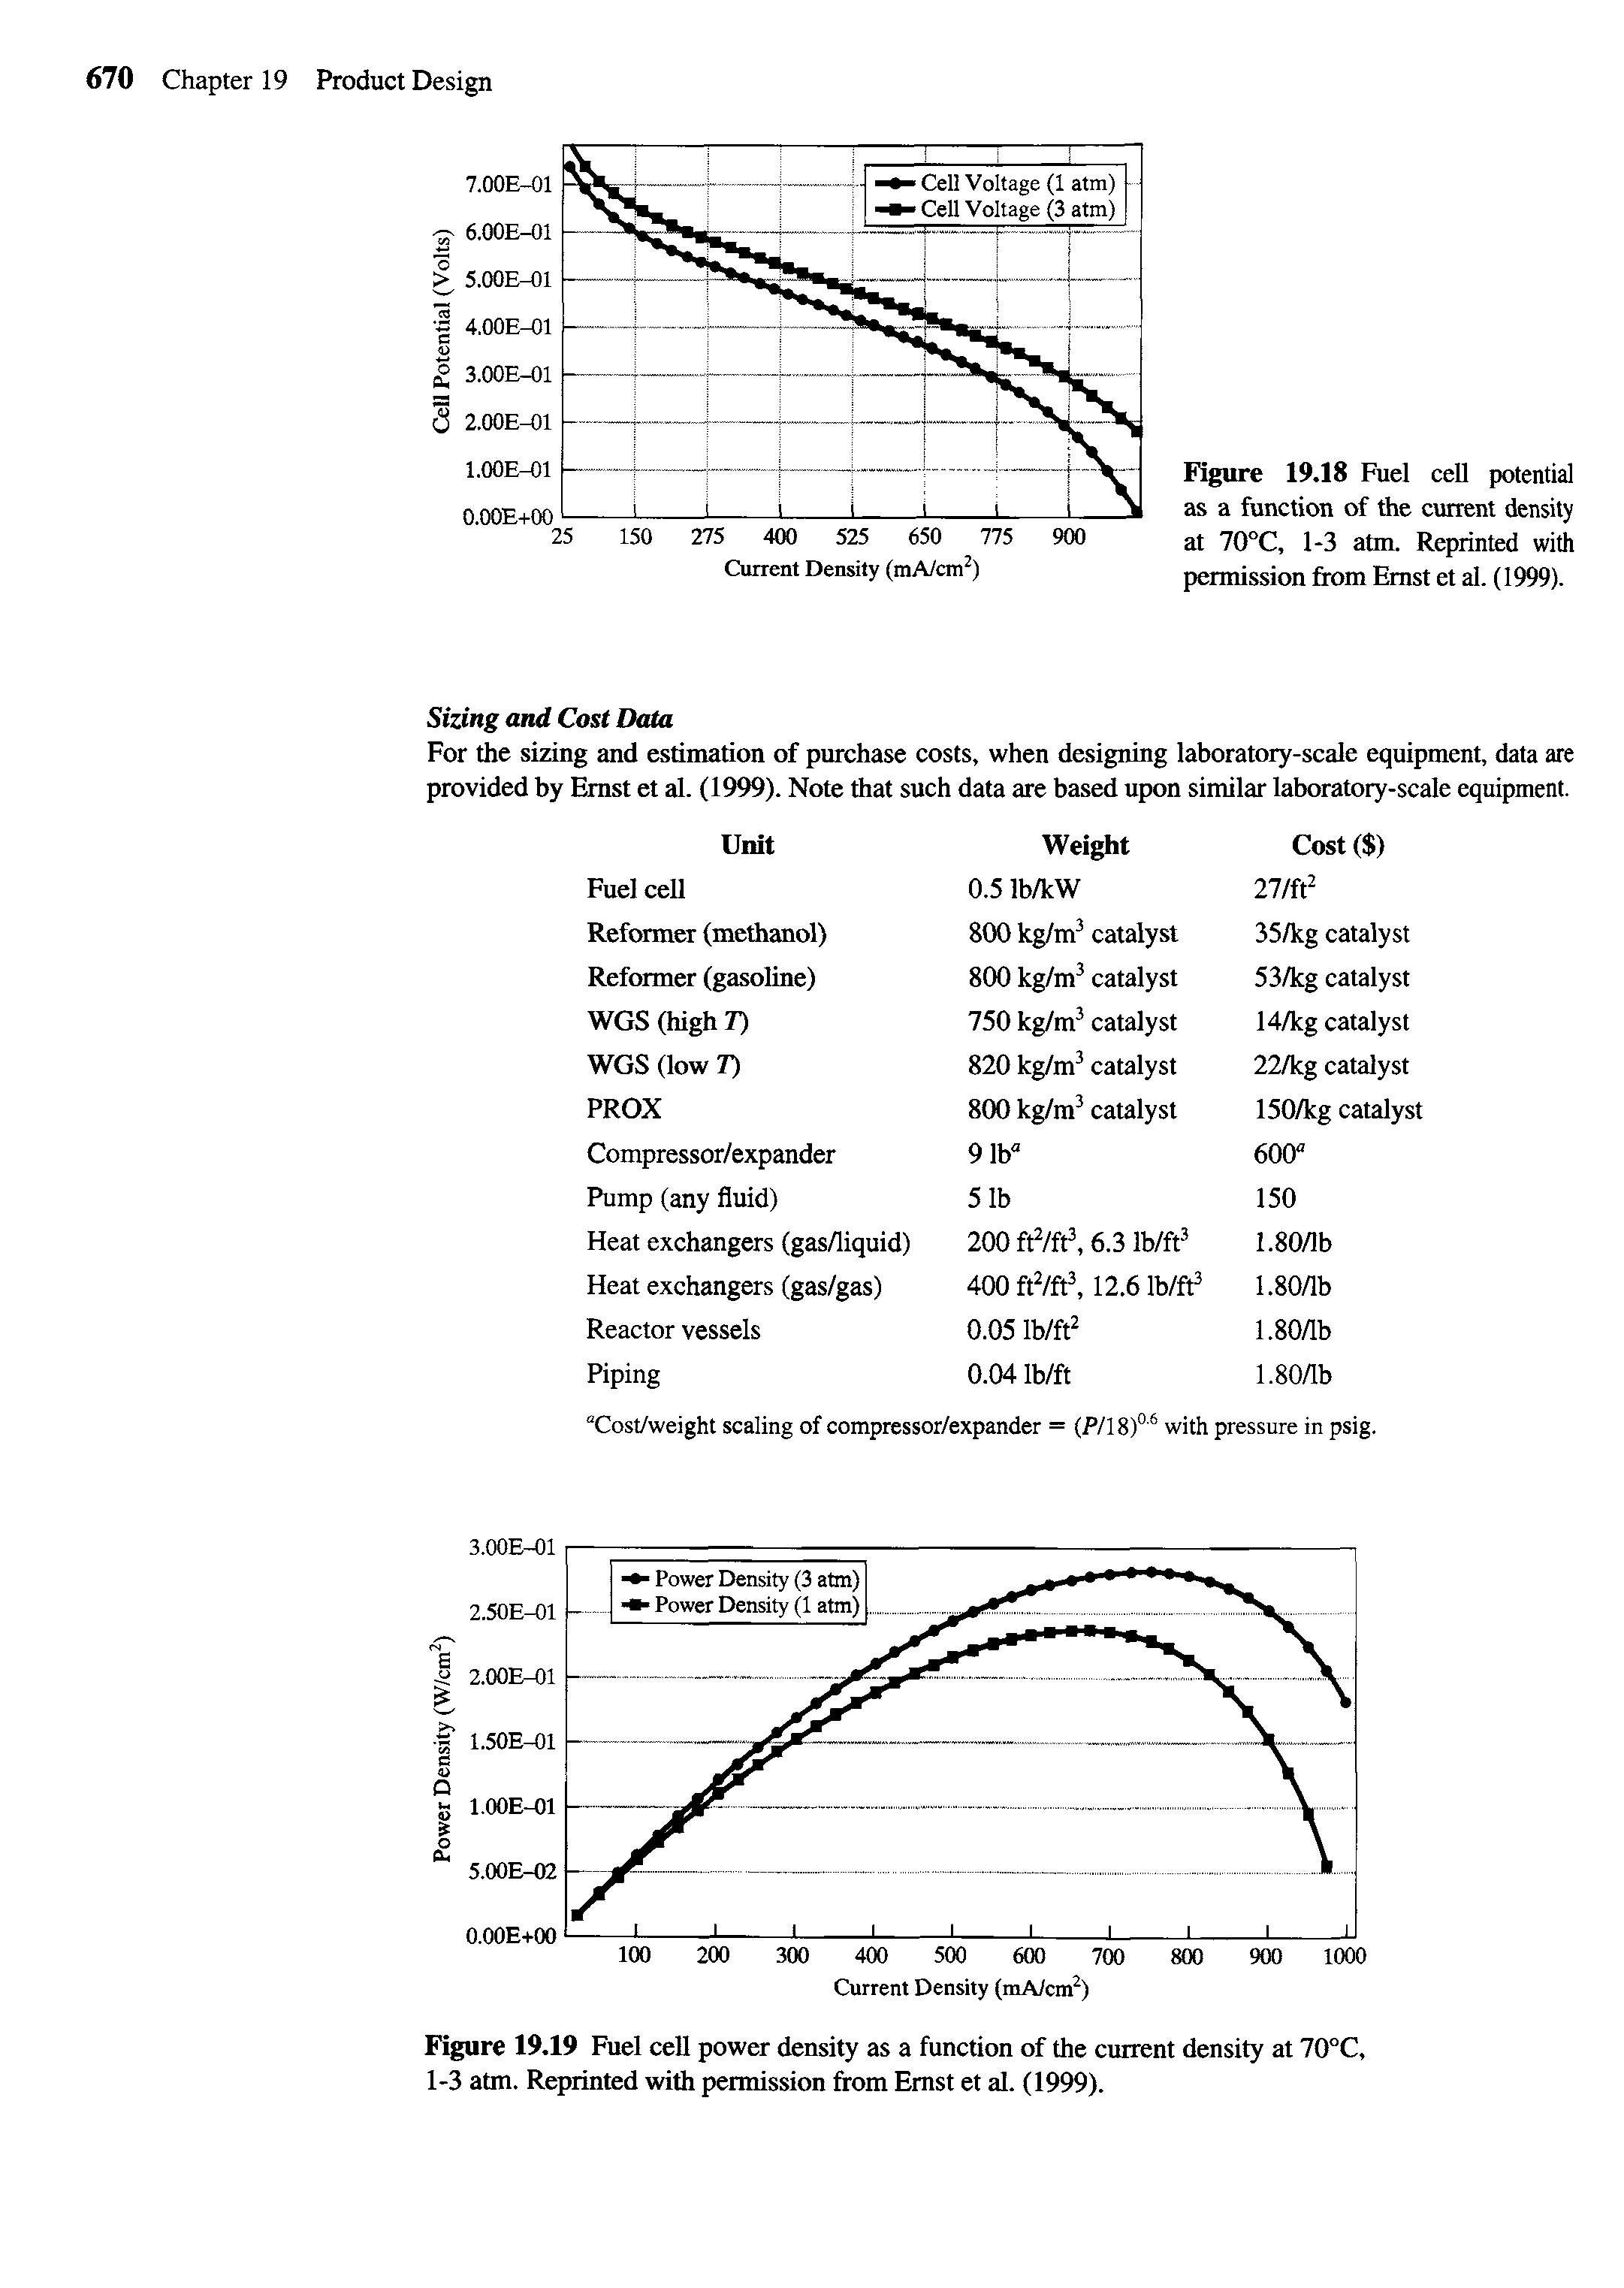 Figure 19.18 Fuel cell potential as a function of the current density at 70°C, 1-3 atm. Reprinted with permission from Ernst et al. (1999).